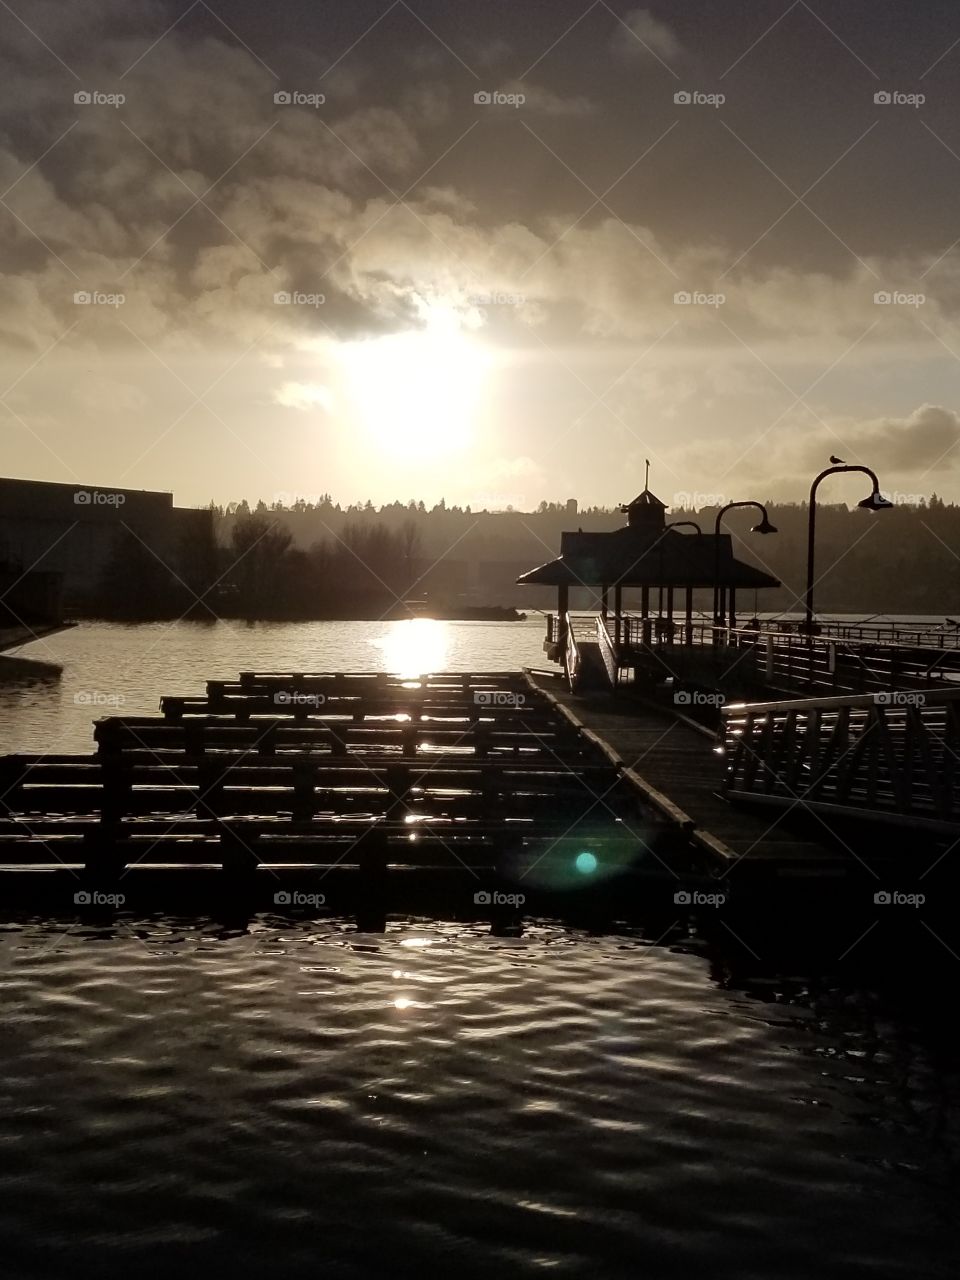 This is a very beautiful picture of a small pier looking over lake Washington in the later hours of the day.